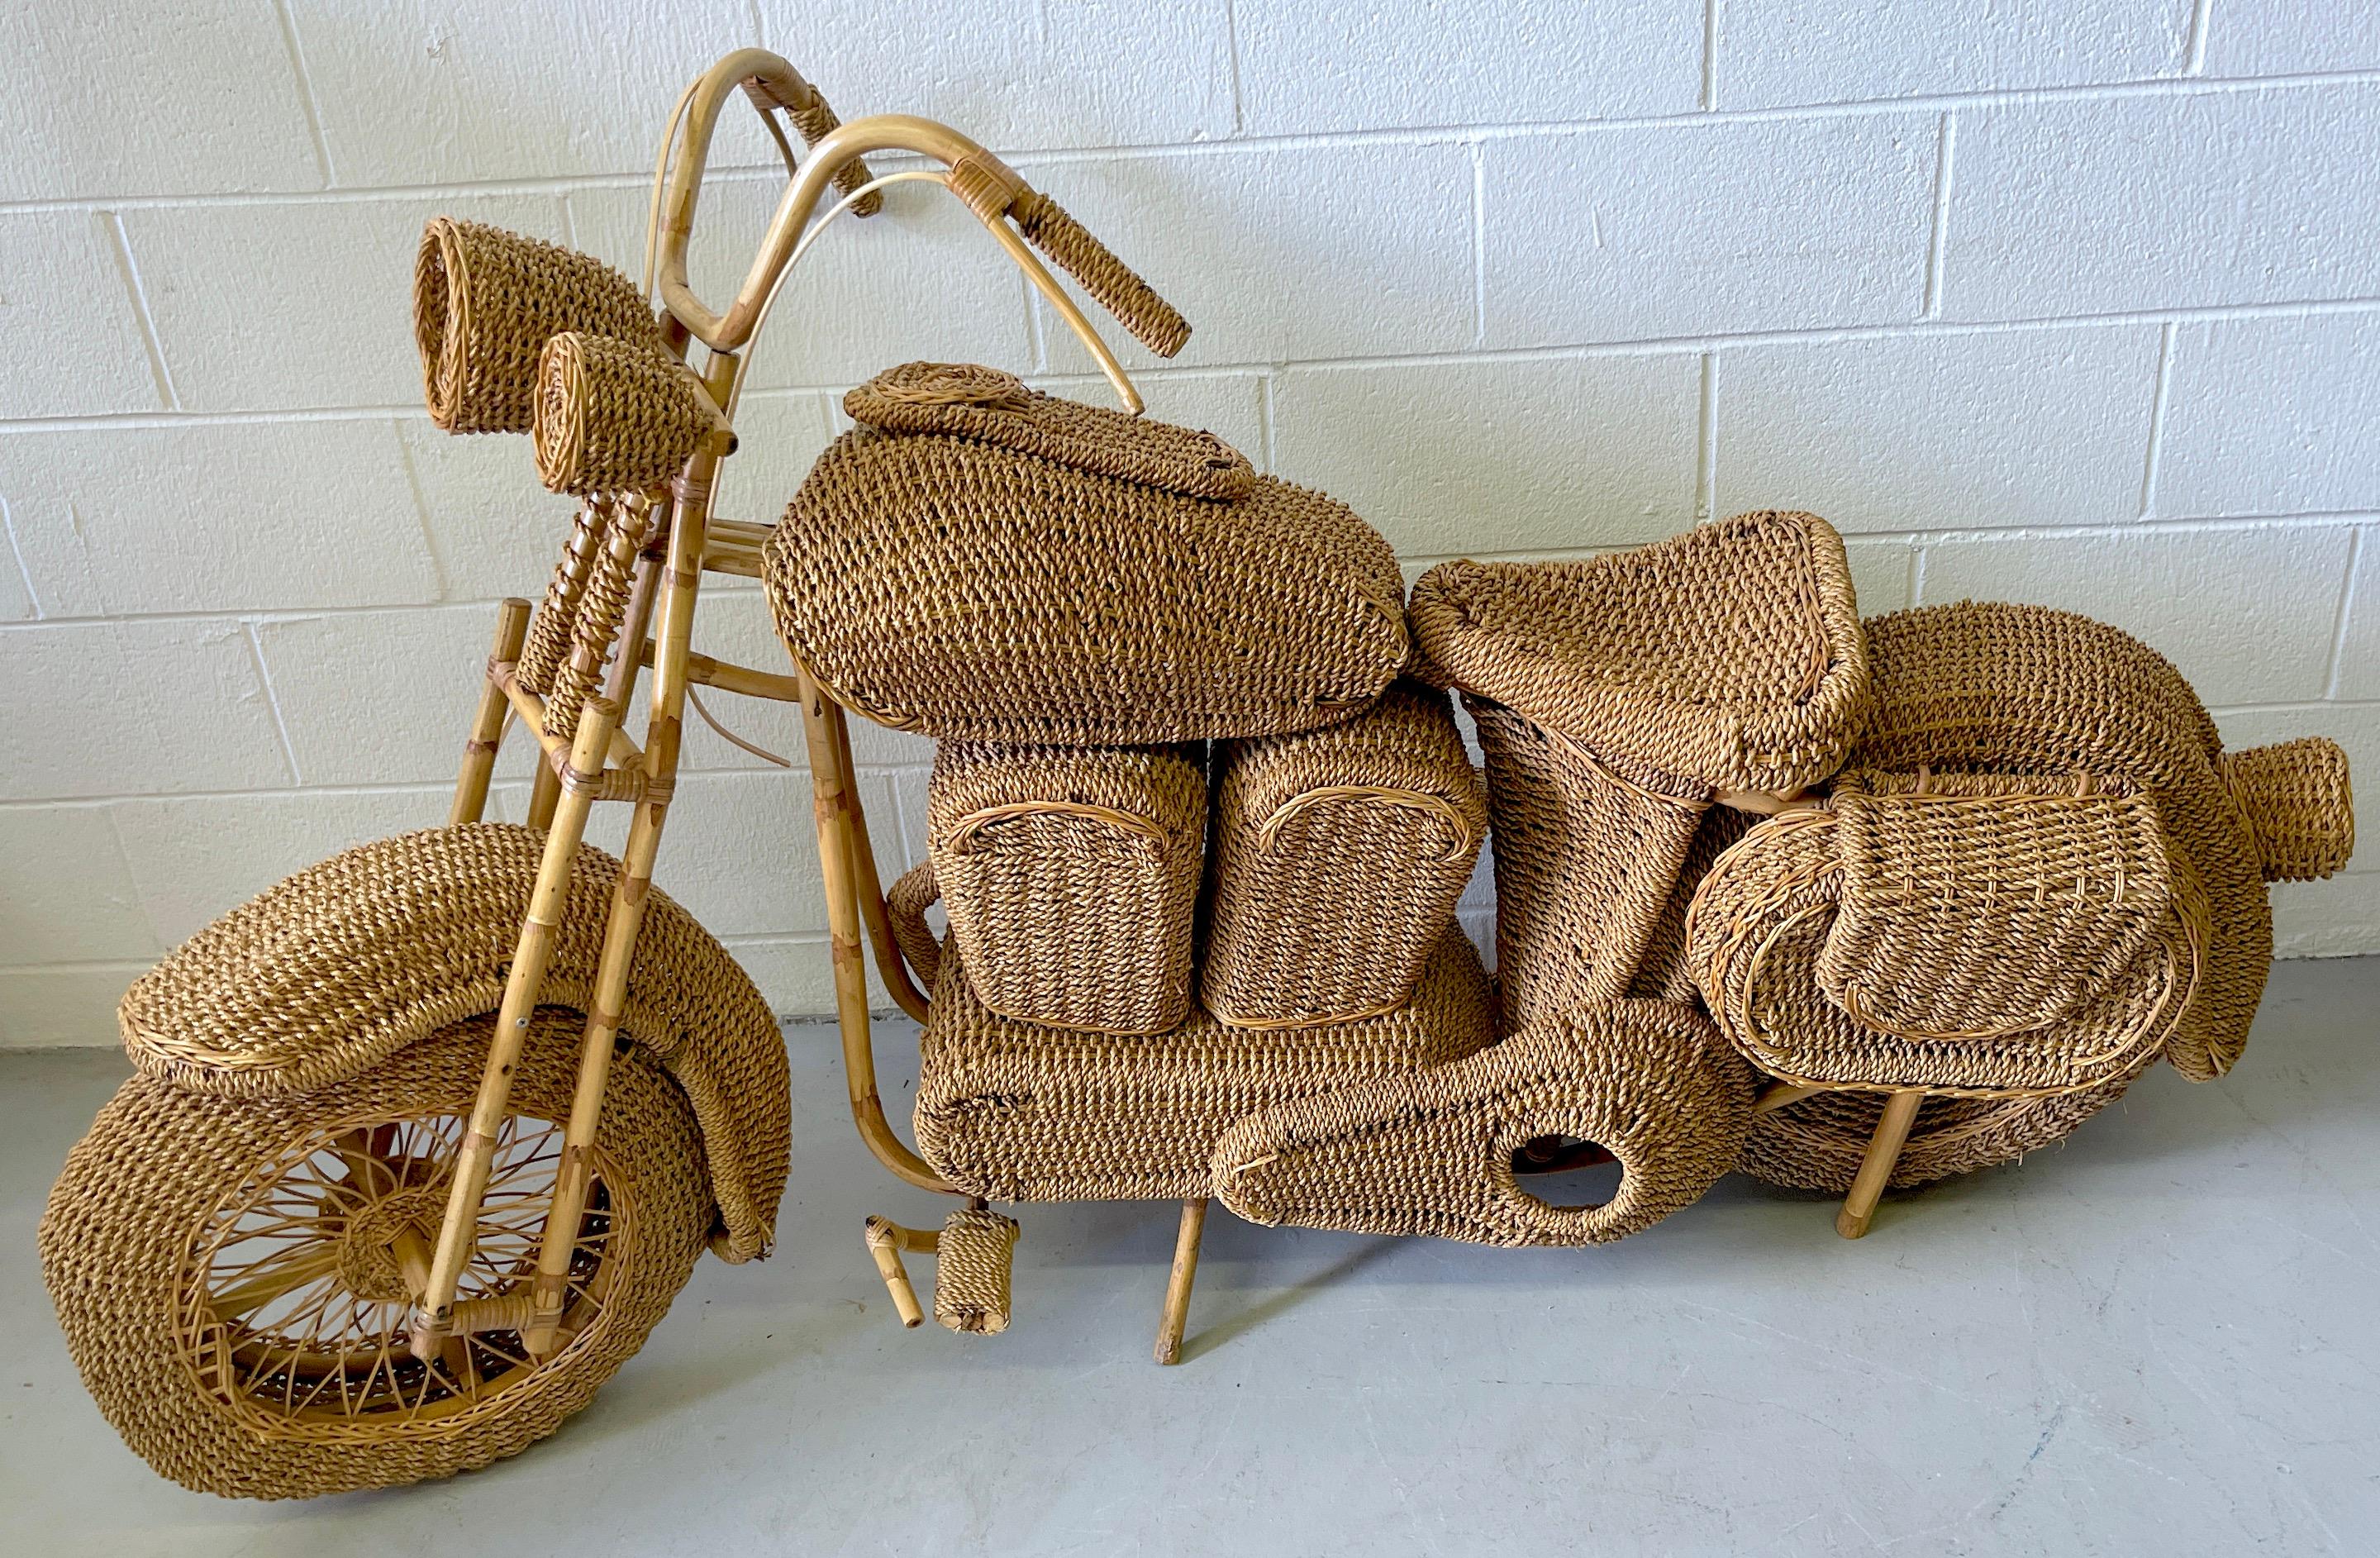 Life size Harley Davidson rattan model of a motorcycle, attributed to Tom Dixon
USA, Circa 1980s

A Mid-Century Modern life size hand-made sculpture of a motorcycle of woven rattan, willow, reed and wood. This work is attributed to the Tom Dixon,